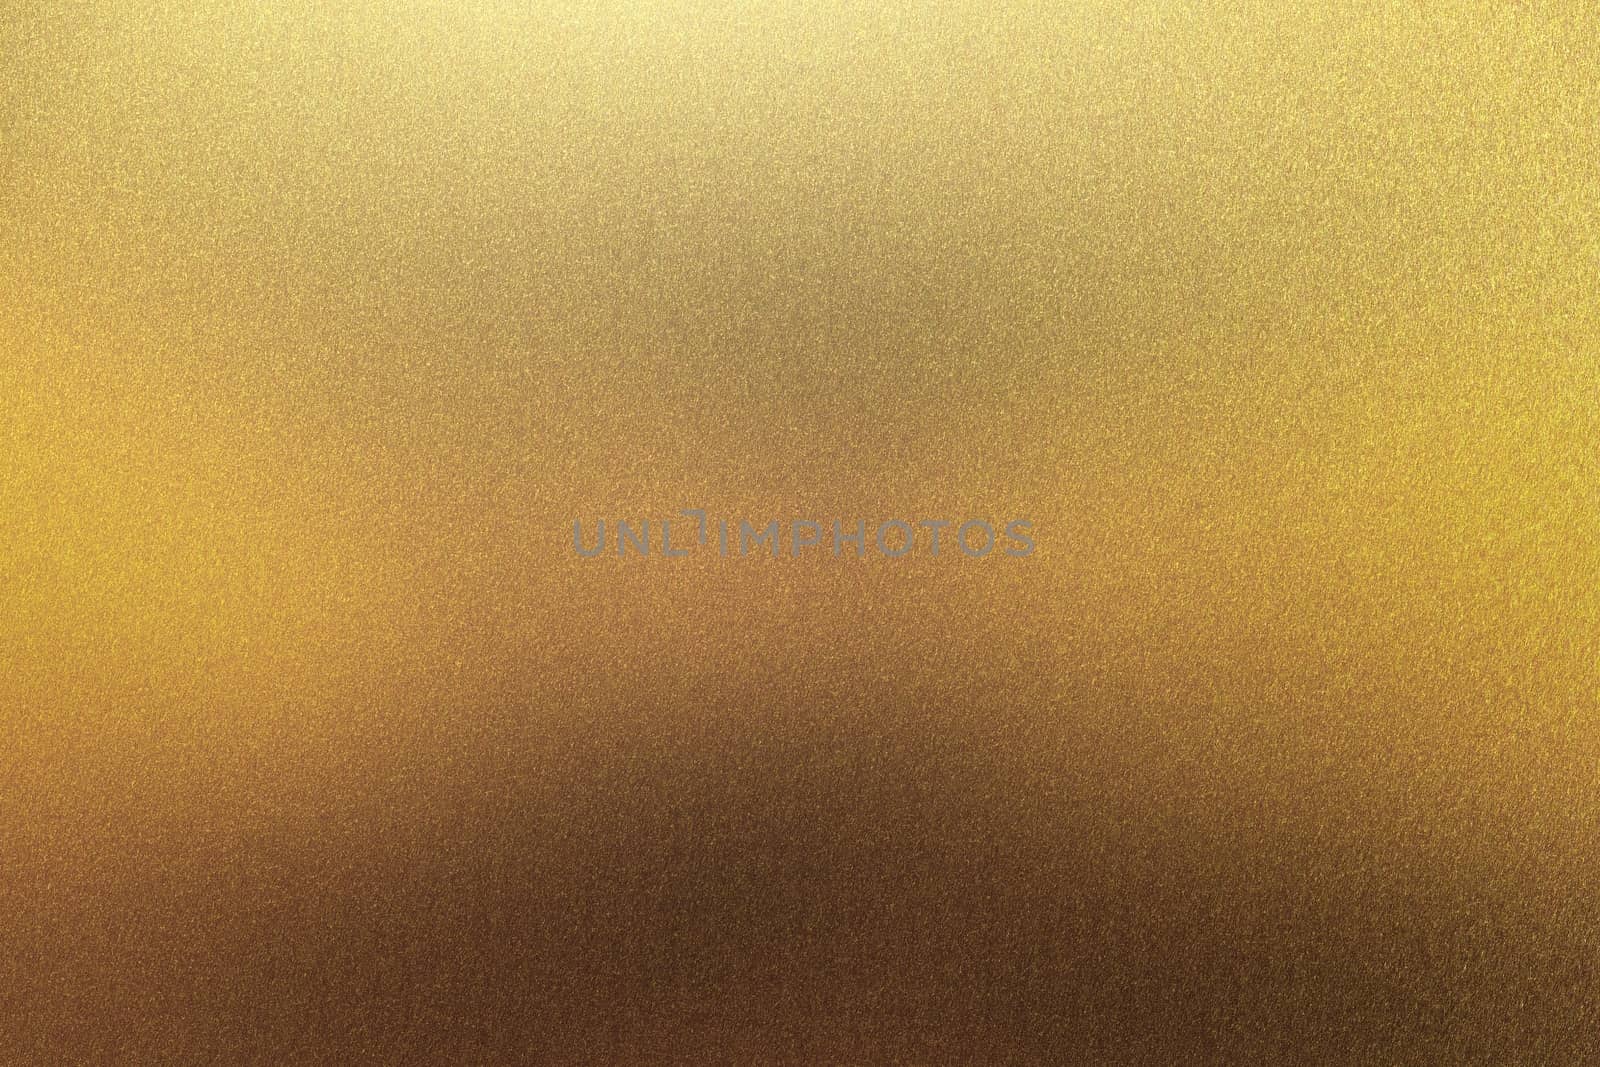 Polished golden steel plate, abstract texture background